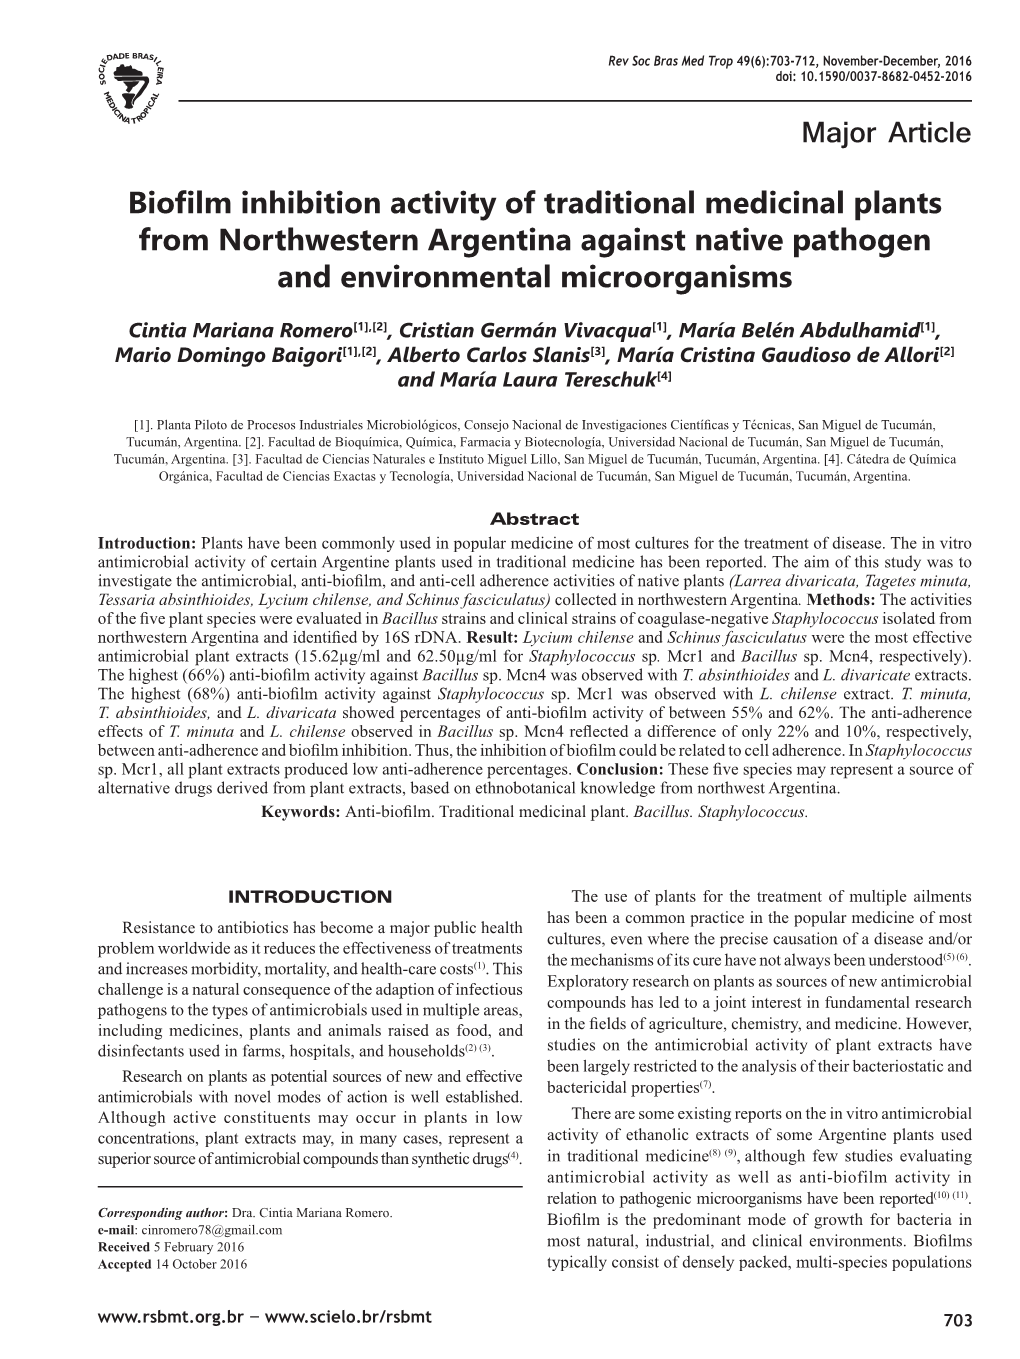 Biofilm Inhibition Activity of Traditional Medicinal Plants from Northwestern